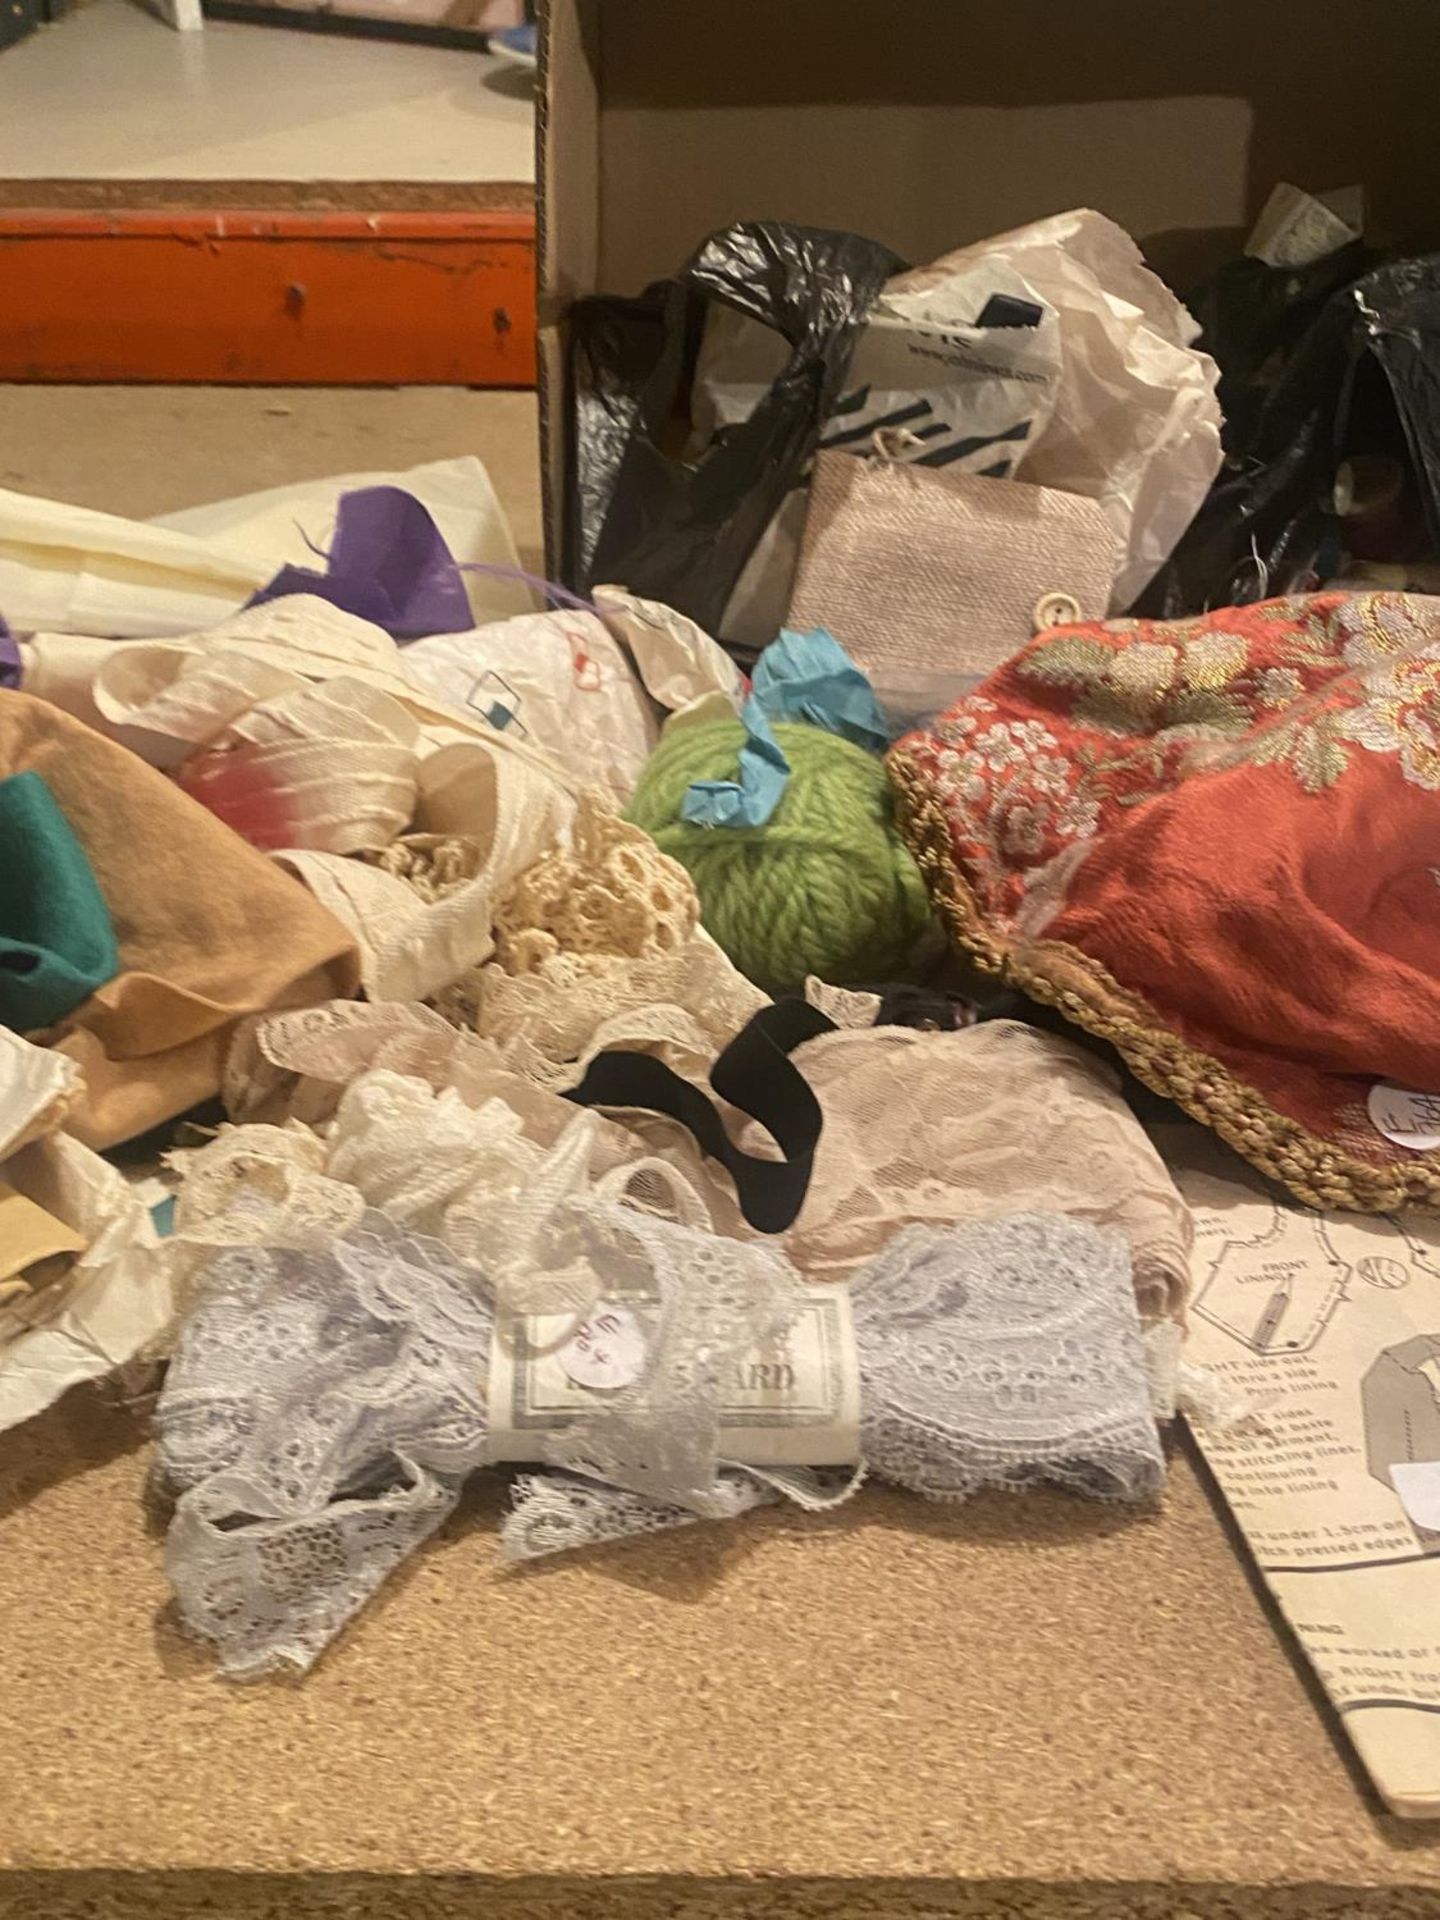 A QUANTITY OF HABERDASHERY ITEMS, TO INCLUDE NOTTINGHAM LACE, SEWING PATTERNS, BUTTONS, ETC - Image 4 of 5